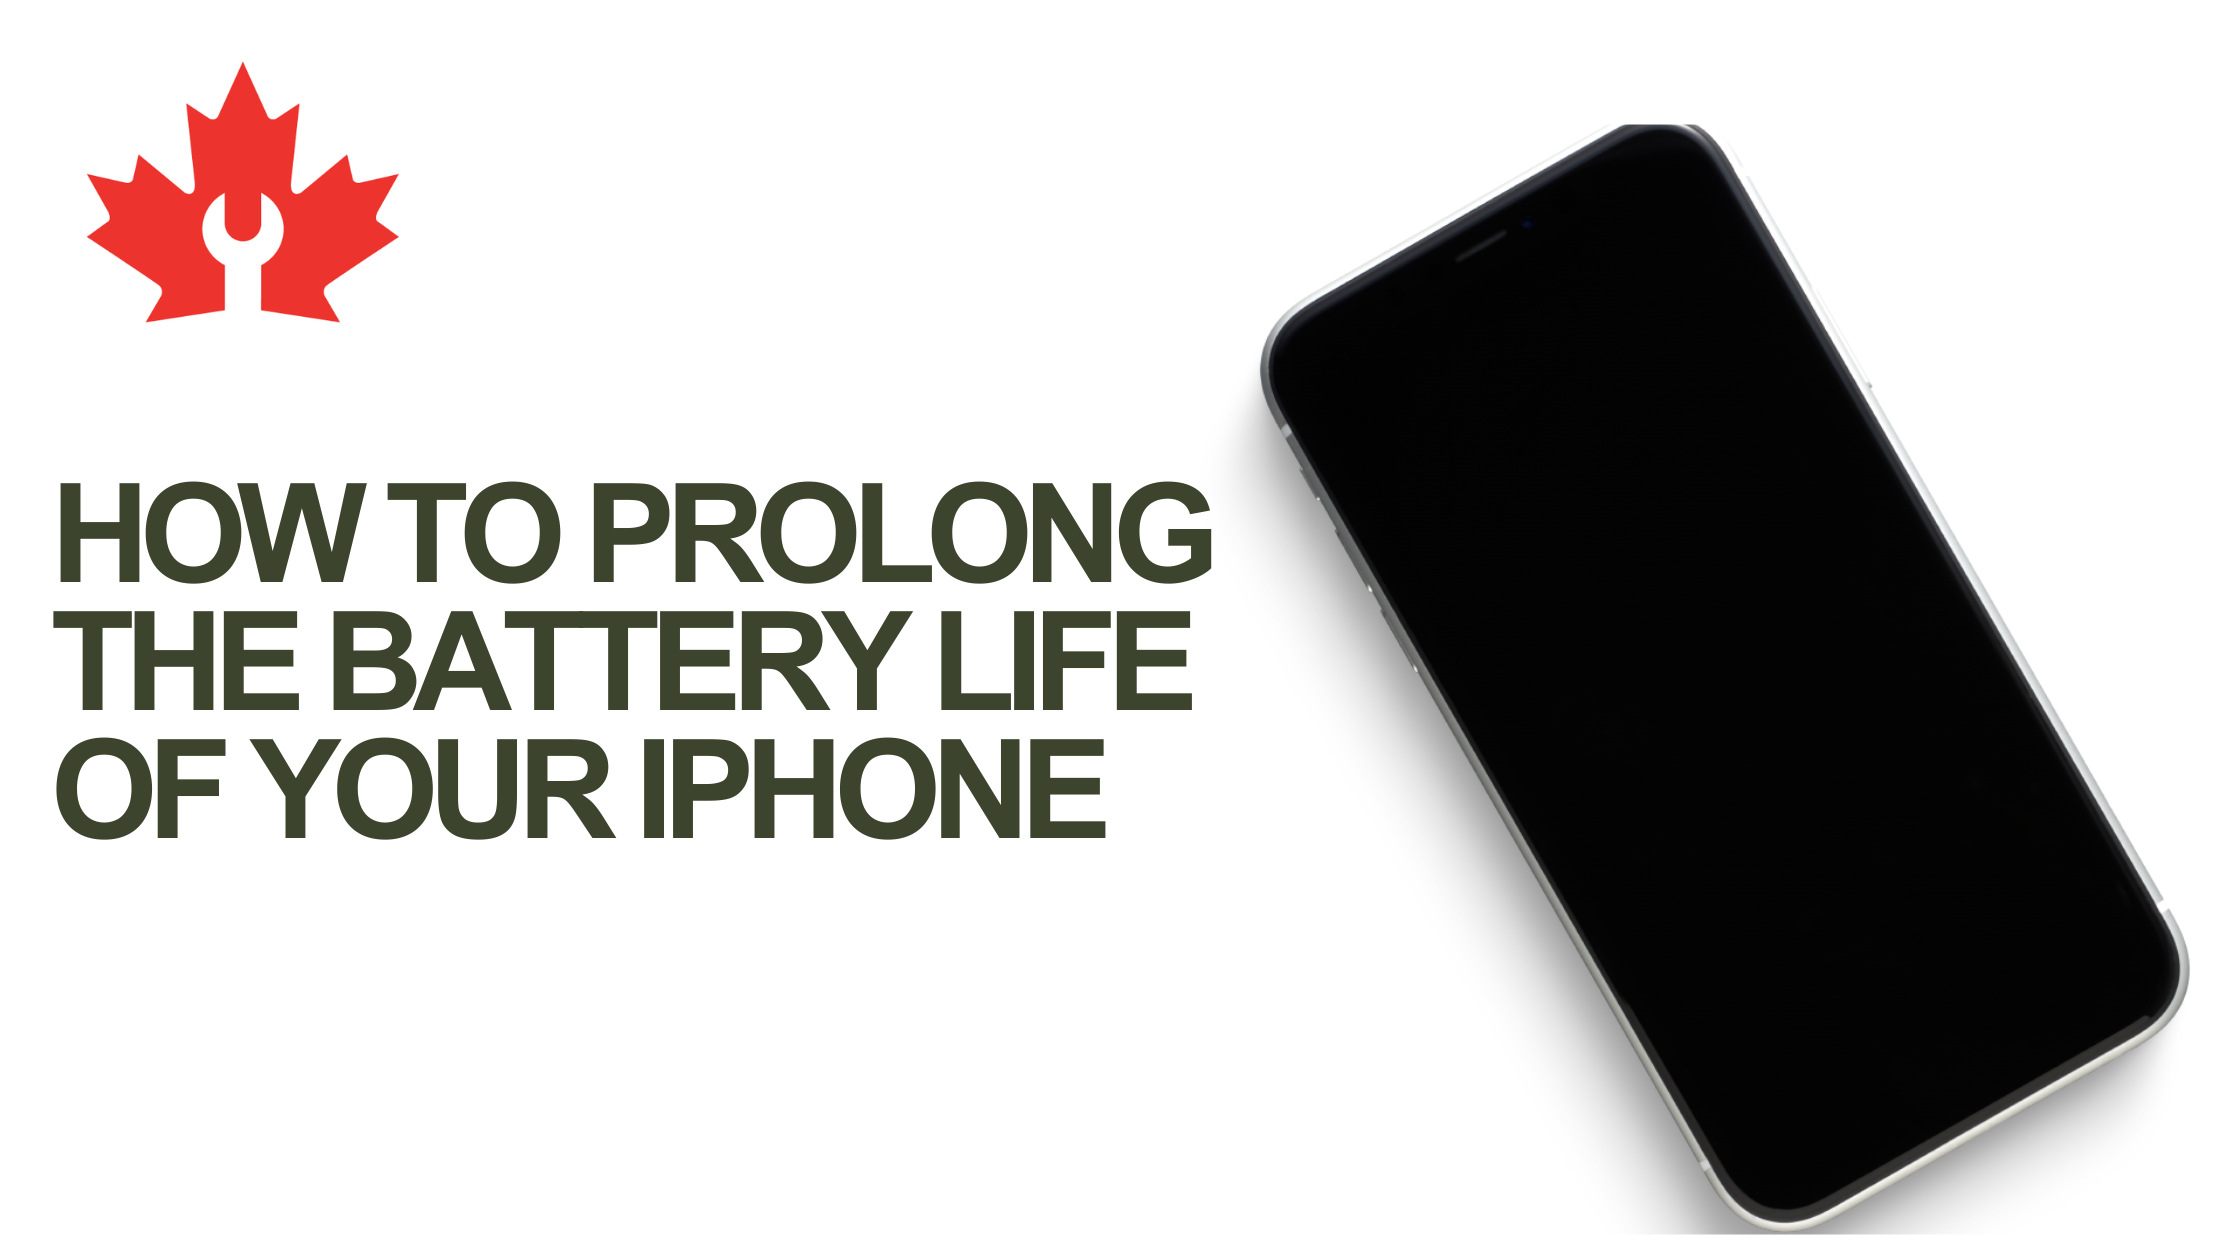 How to prolong the battery life of your iPhone